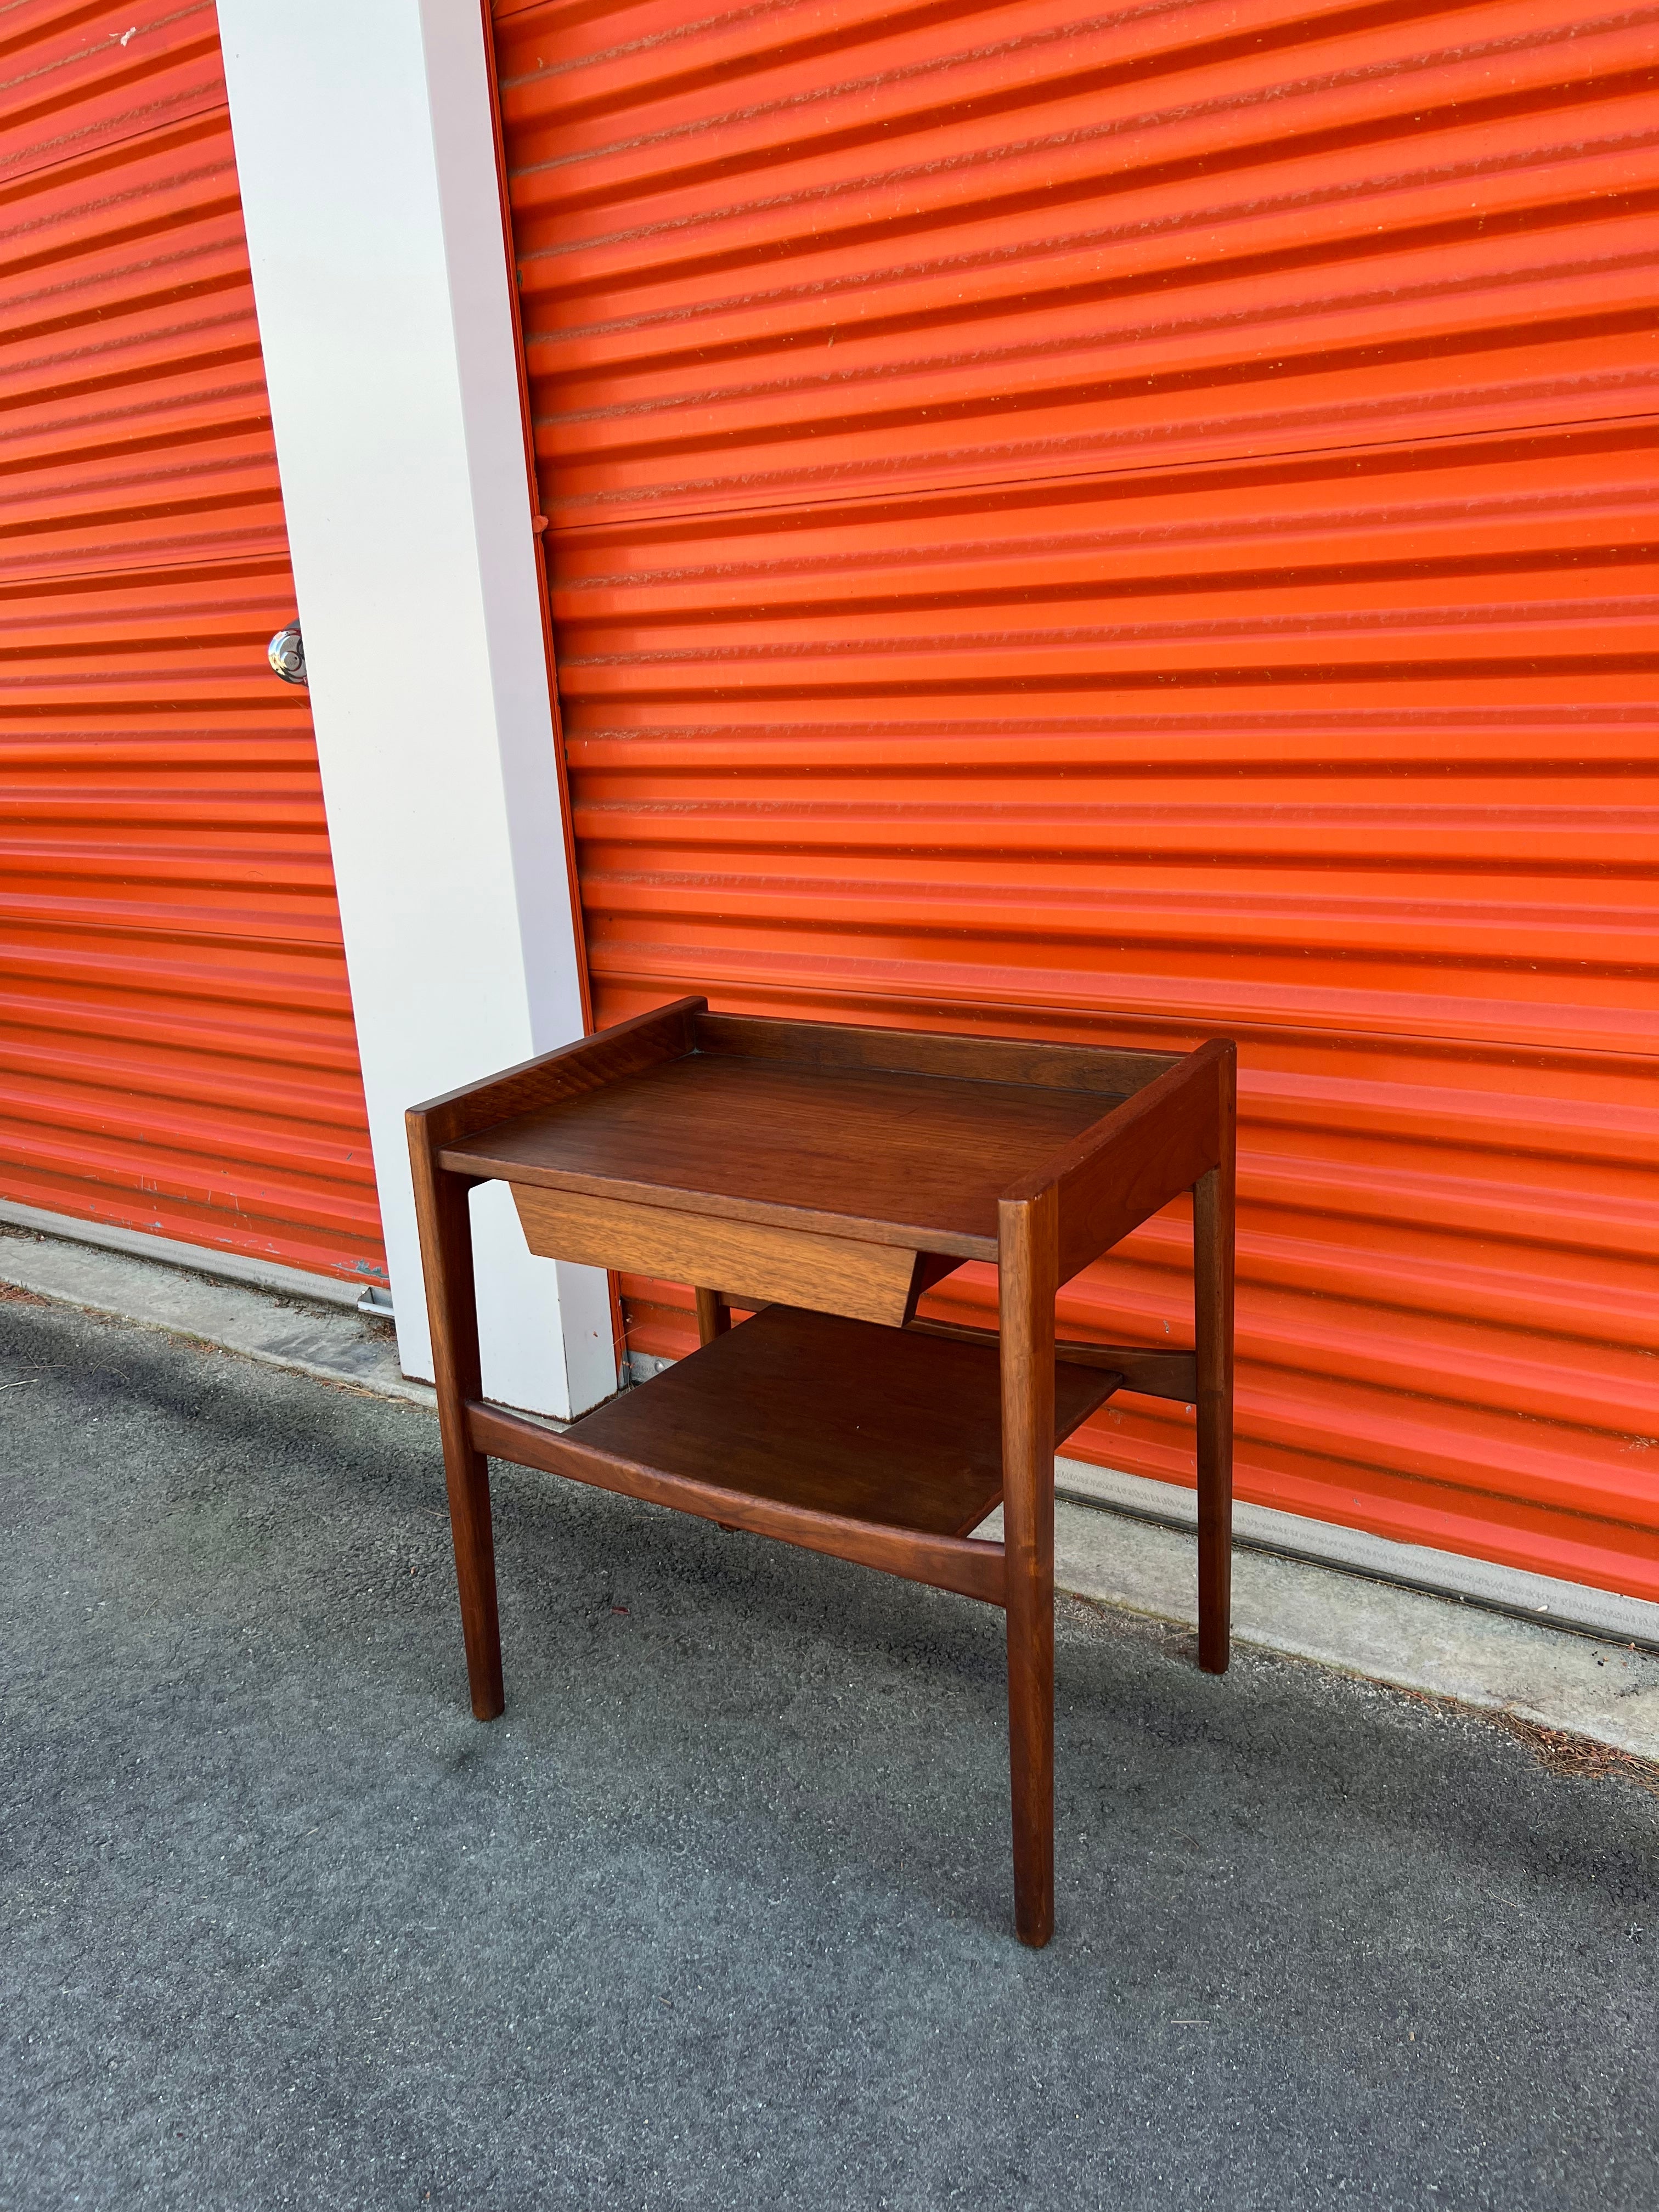 Mid-Century Modern sculptural, hard to find, Jens Risom nightstand or end table with a sleek single drawer and open bottom shelf. Overall good condition with some light scuffing/scratching from age appropriate wear. Labeled on the inside of the